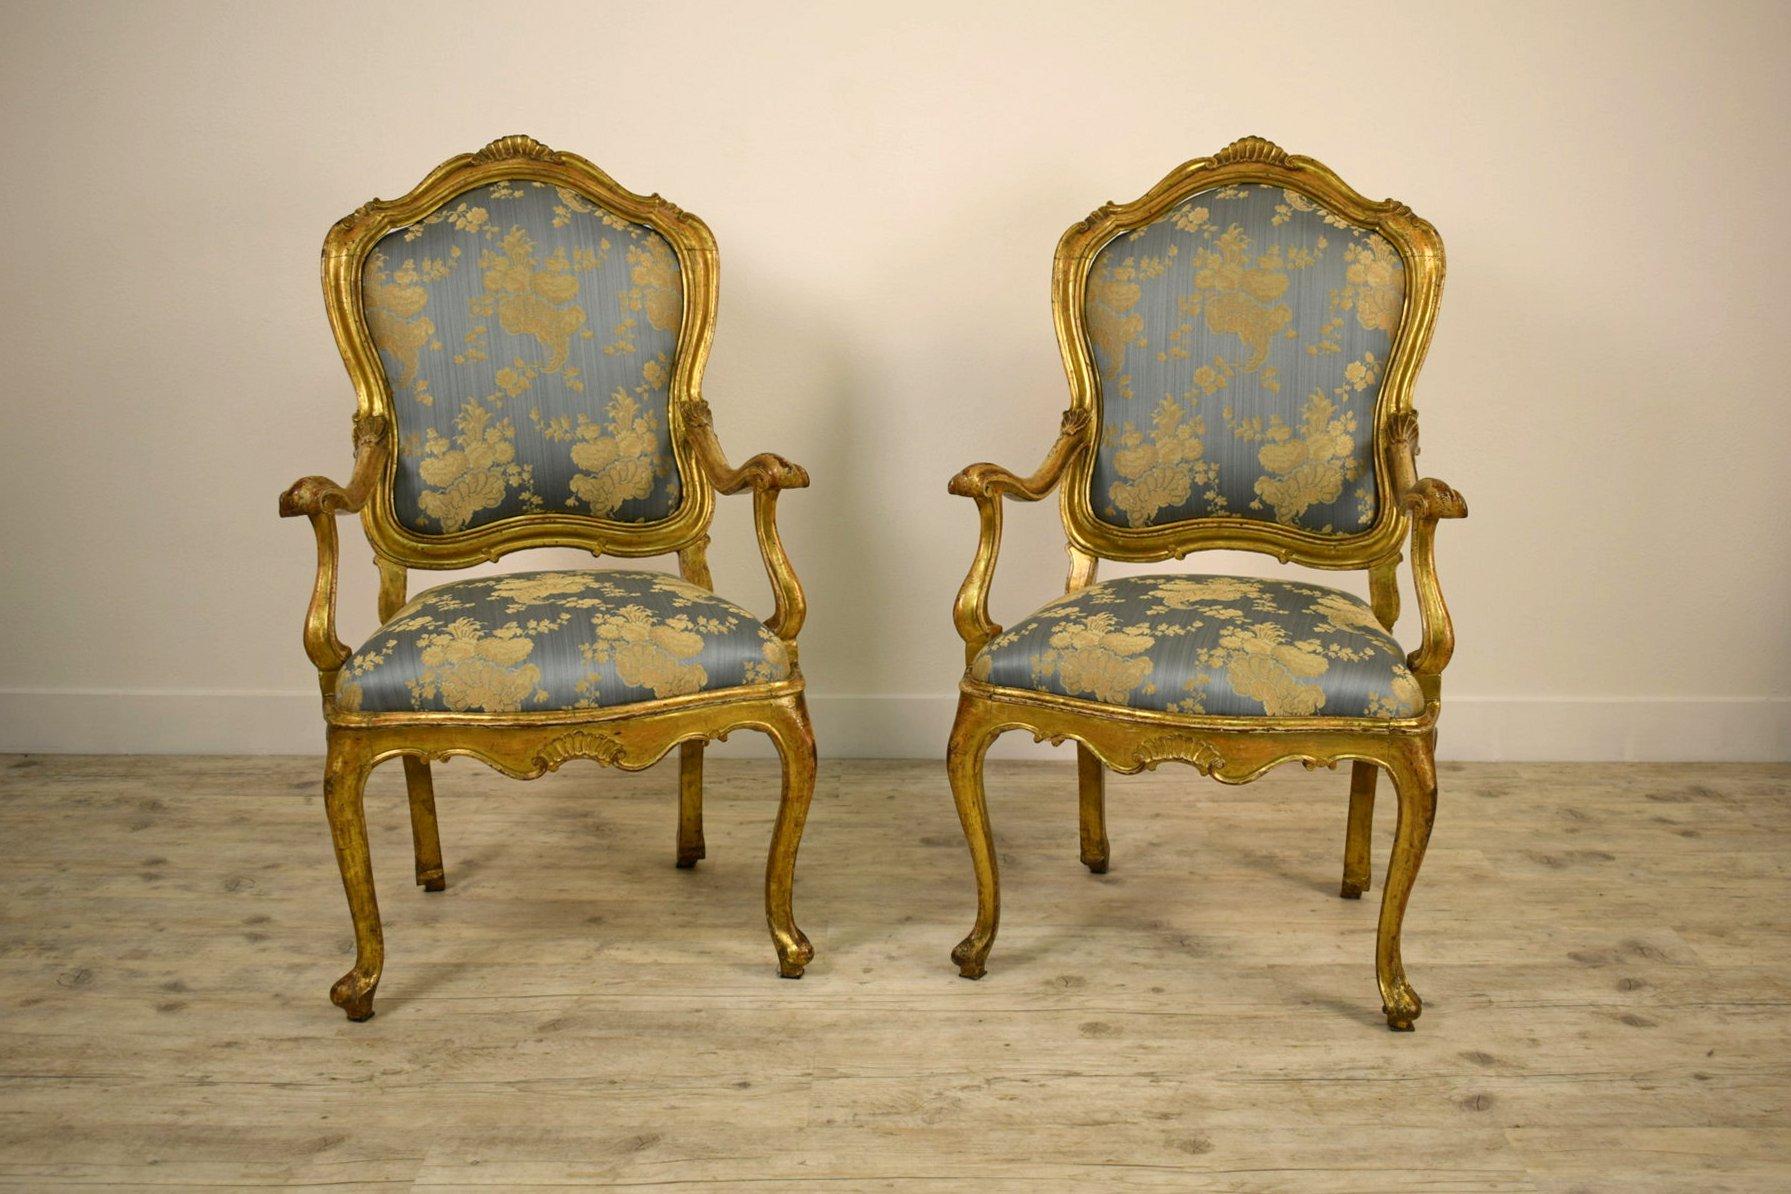 18th century couple of Italian giltwood armchairs

This refined and important pair of armchairs was made around the middle of the 18th century in Venice, Italy, in carved giltwood and reflects the typical stylistic dictates of Venetian